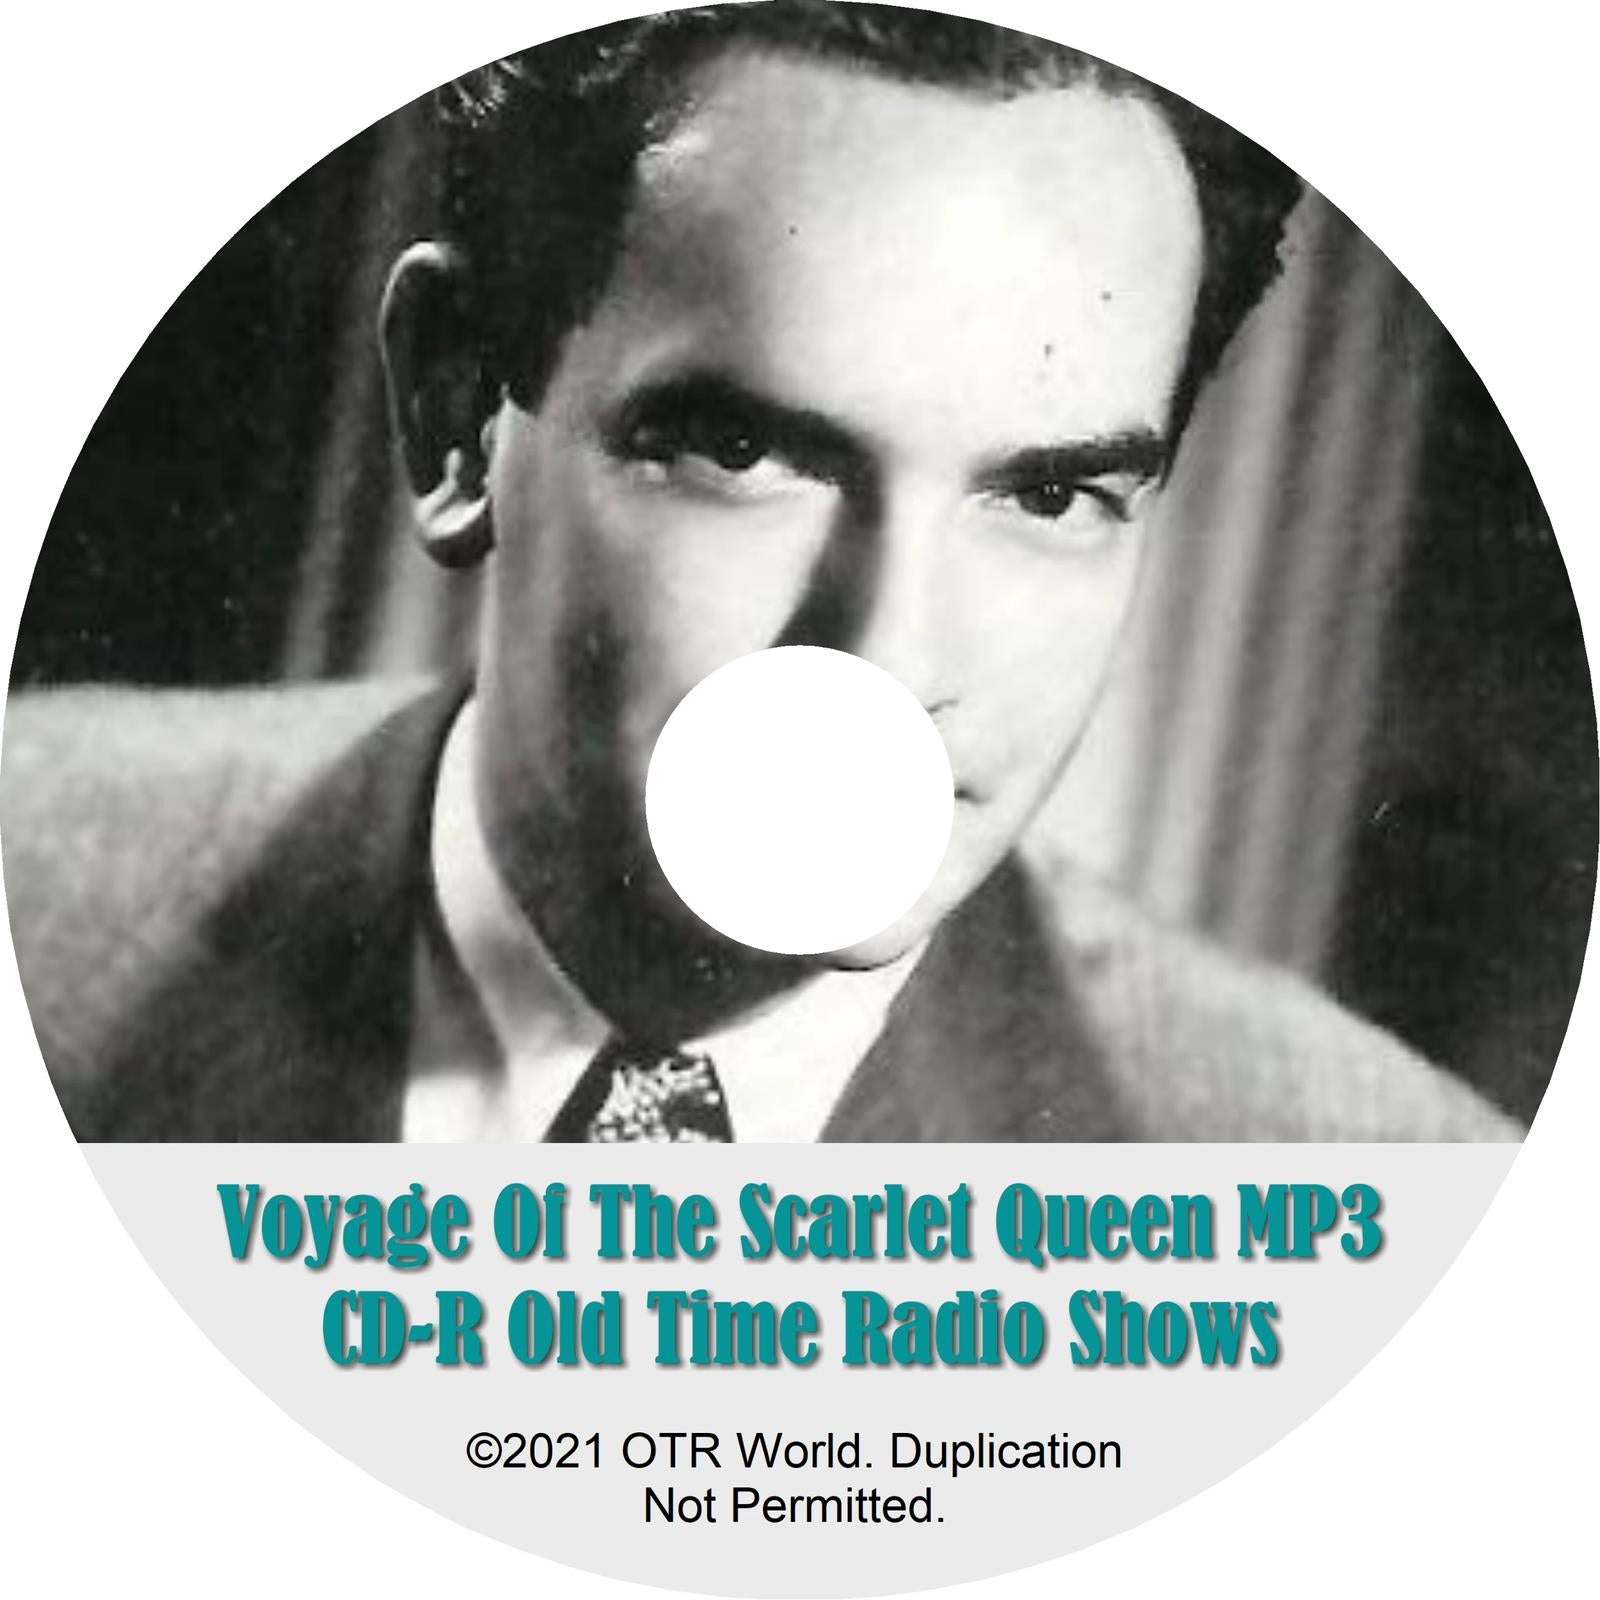 The Voyage of the Scarlet Queen OTRS OTR Radio Shows MP3 On CD-R 33 Episodes